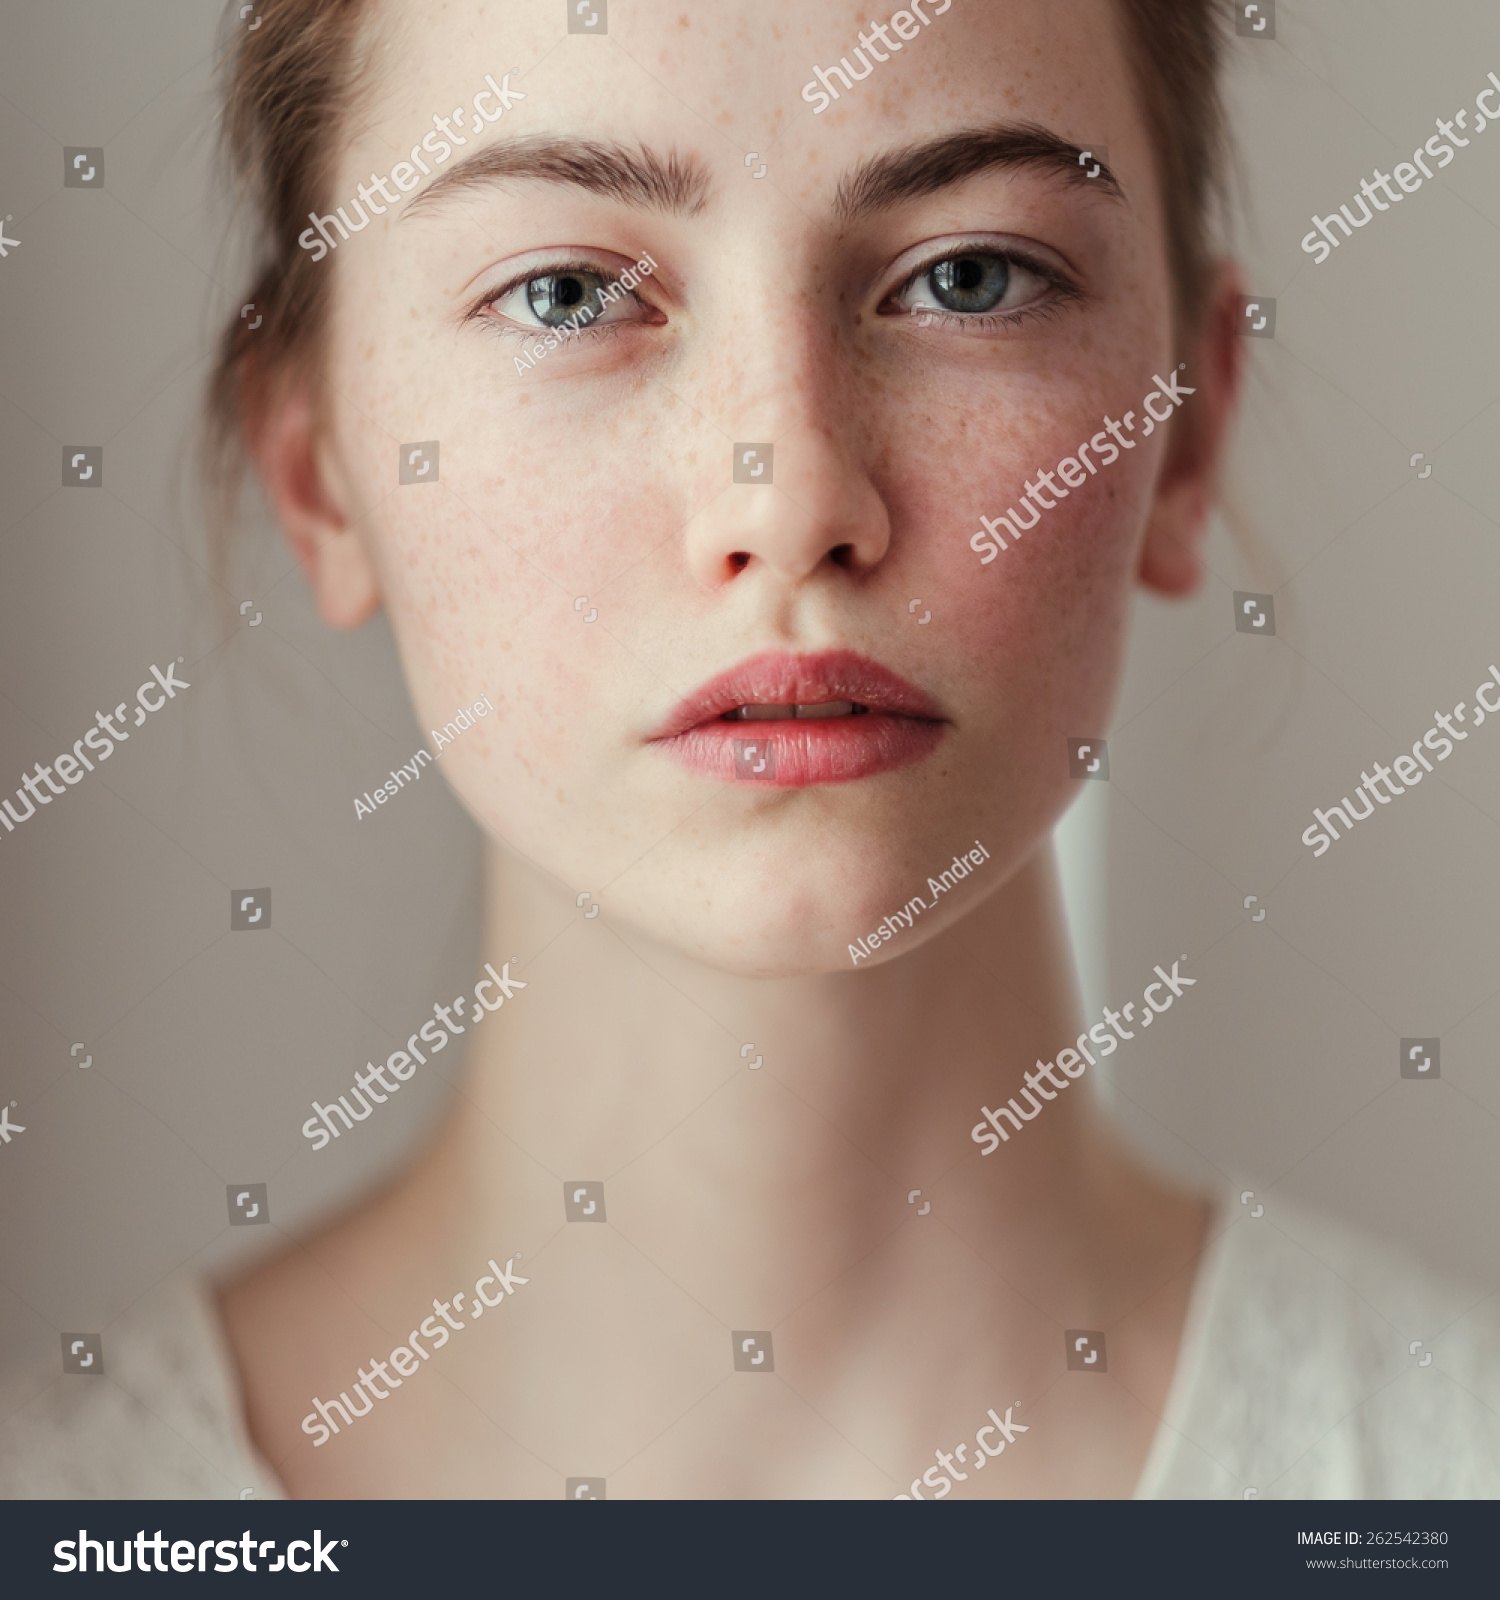 Morning portrait of a beautiful young girl with freckles #262542380